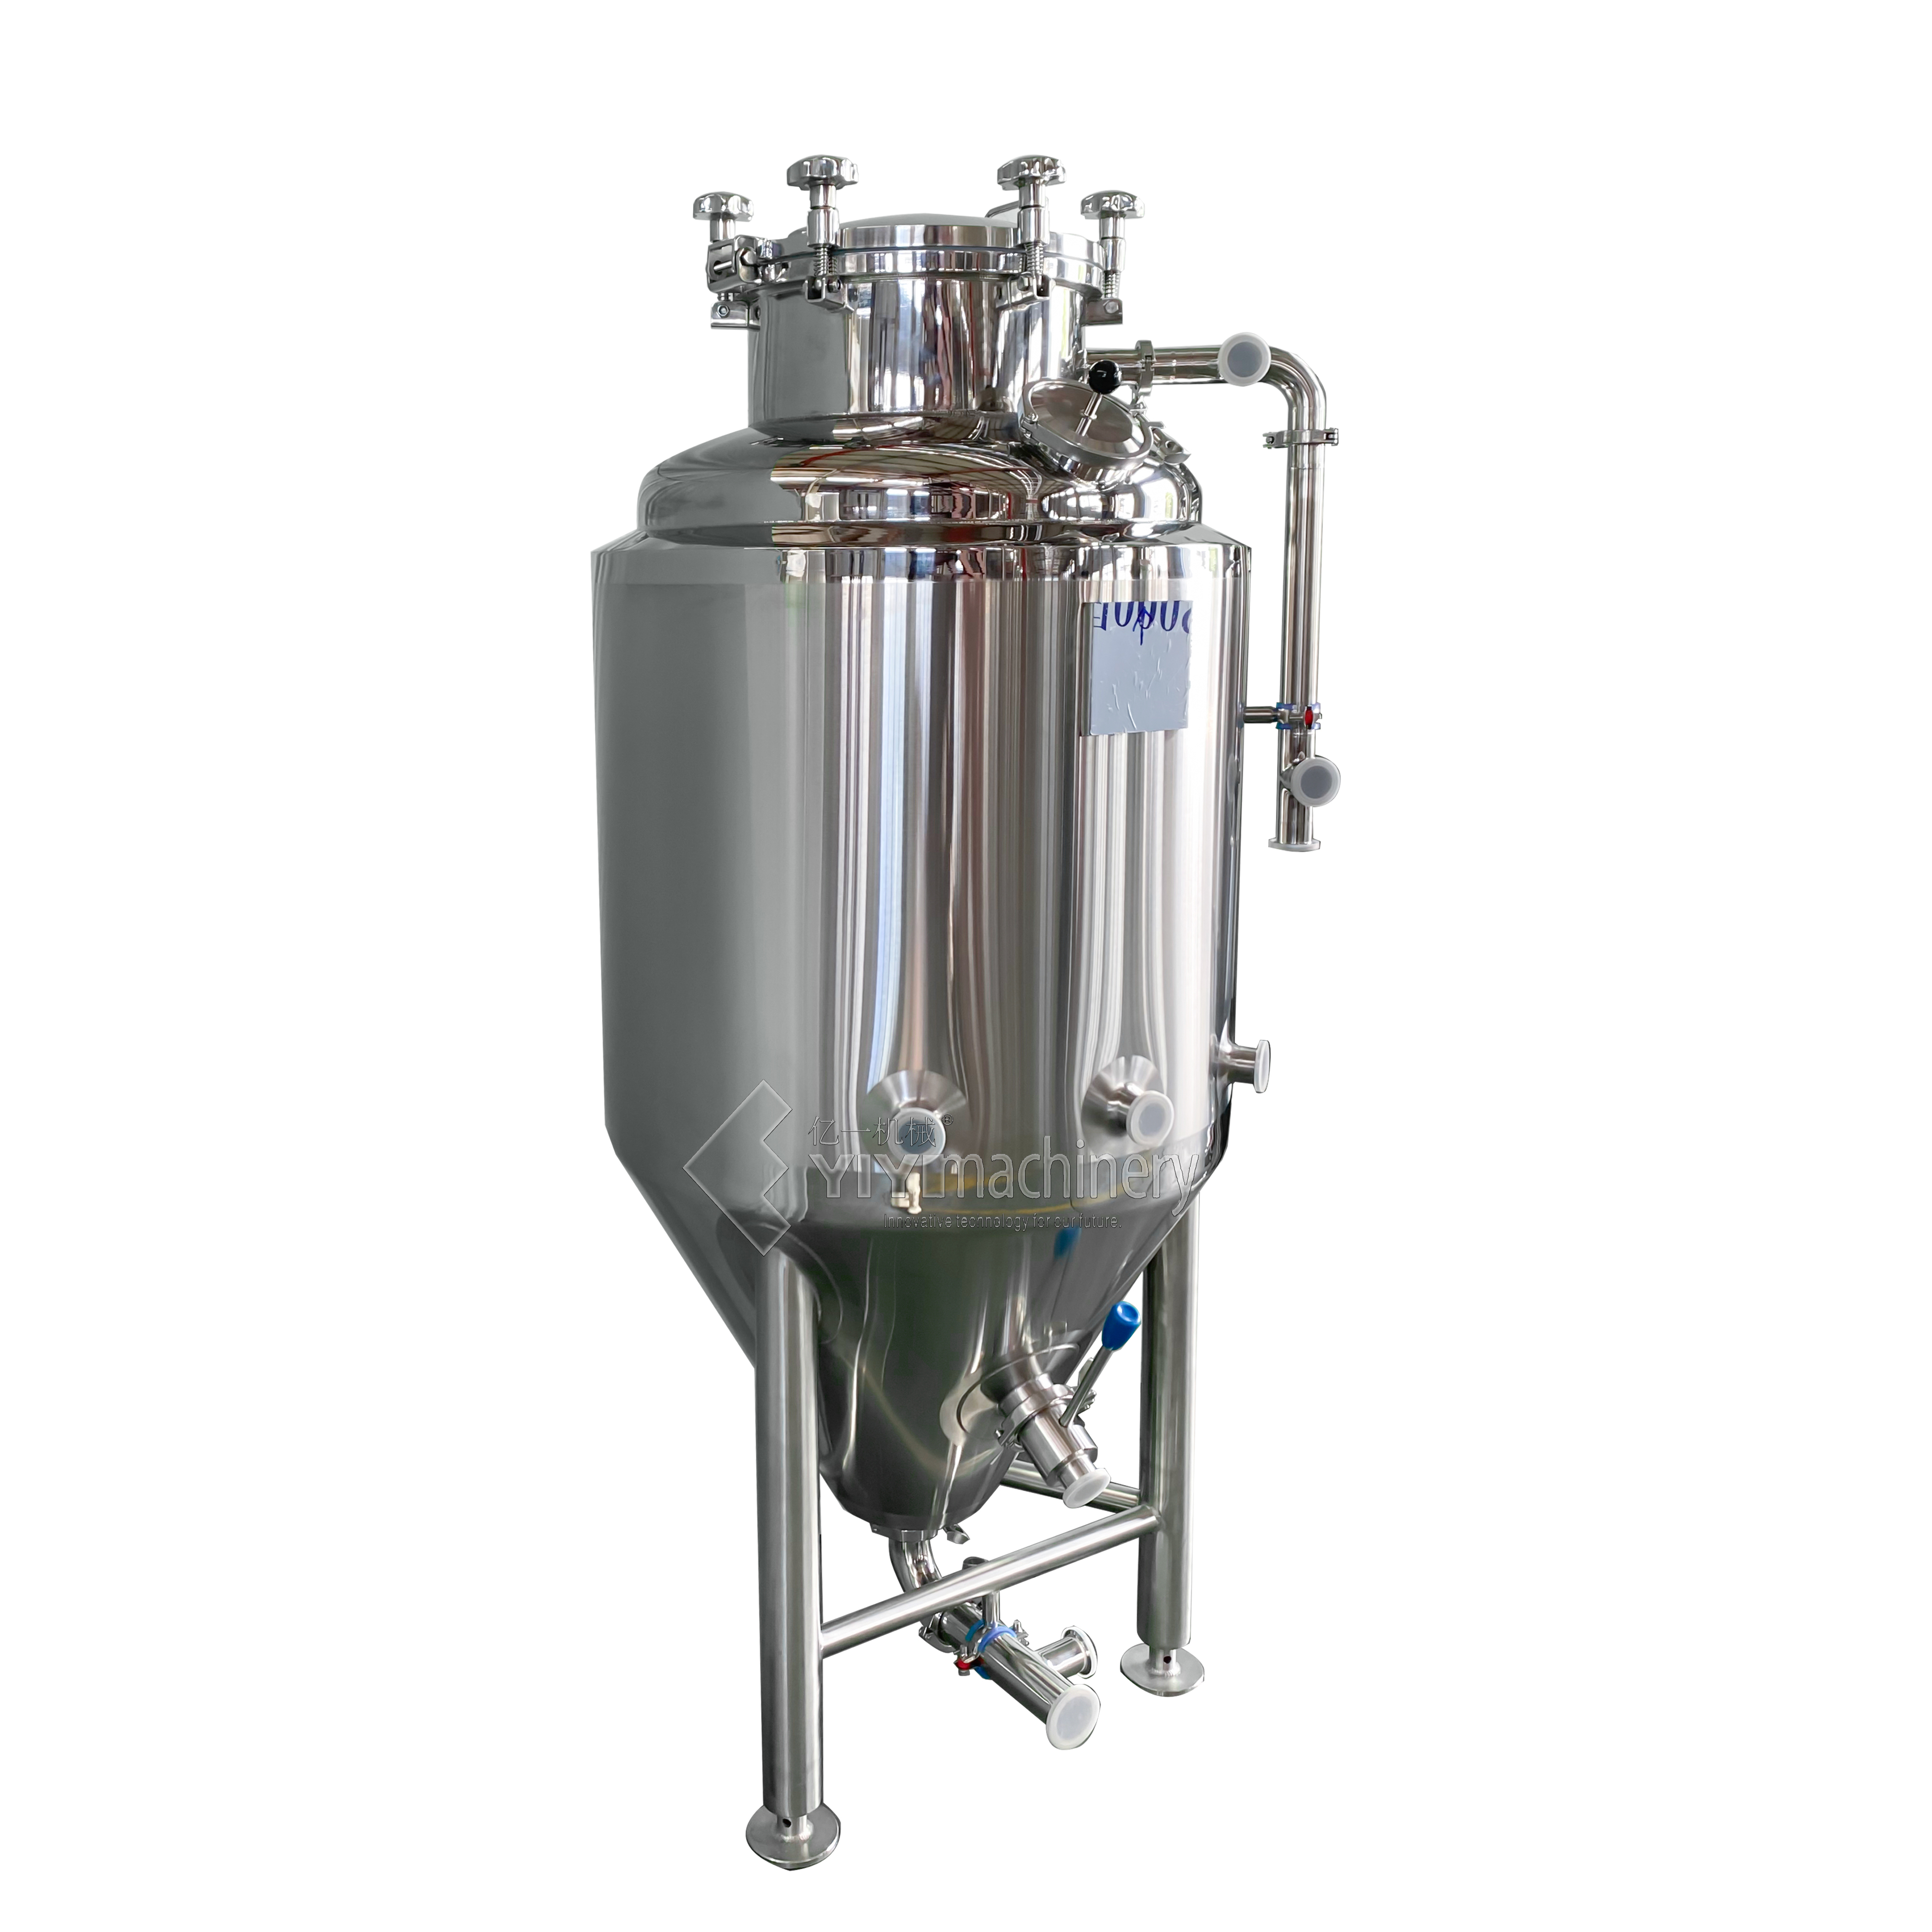 600L Isobaric Beer Fermentation Tank Unitank Stainless Steel Conical Ferment Tank with Cooling Jacket China